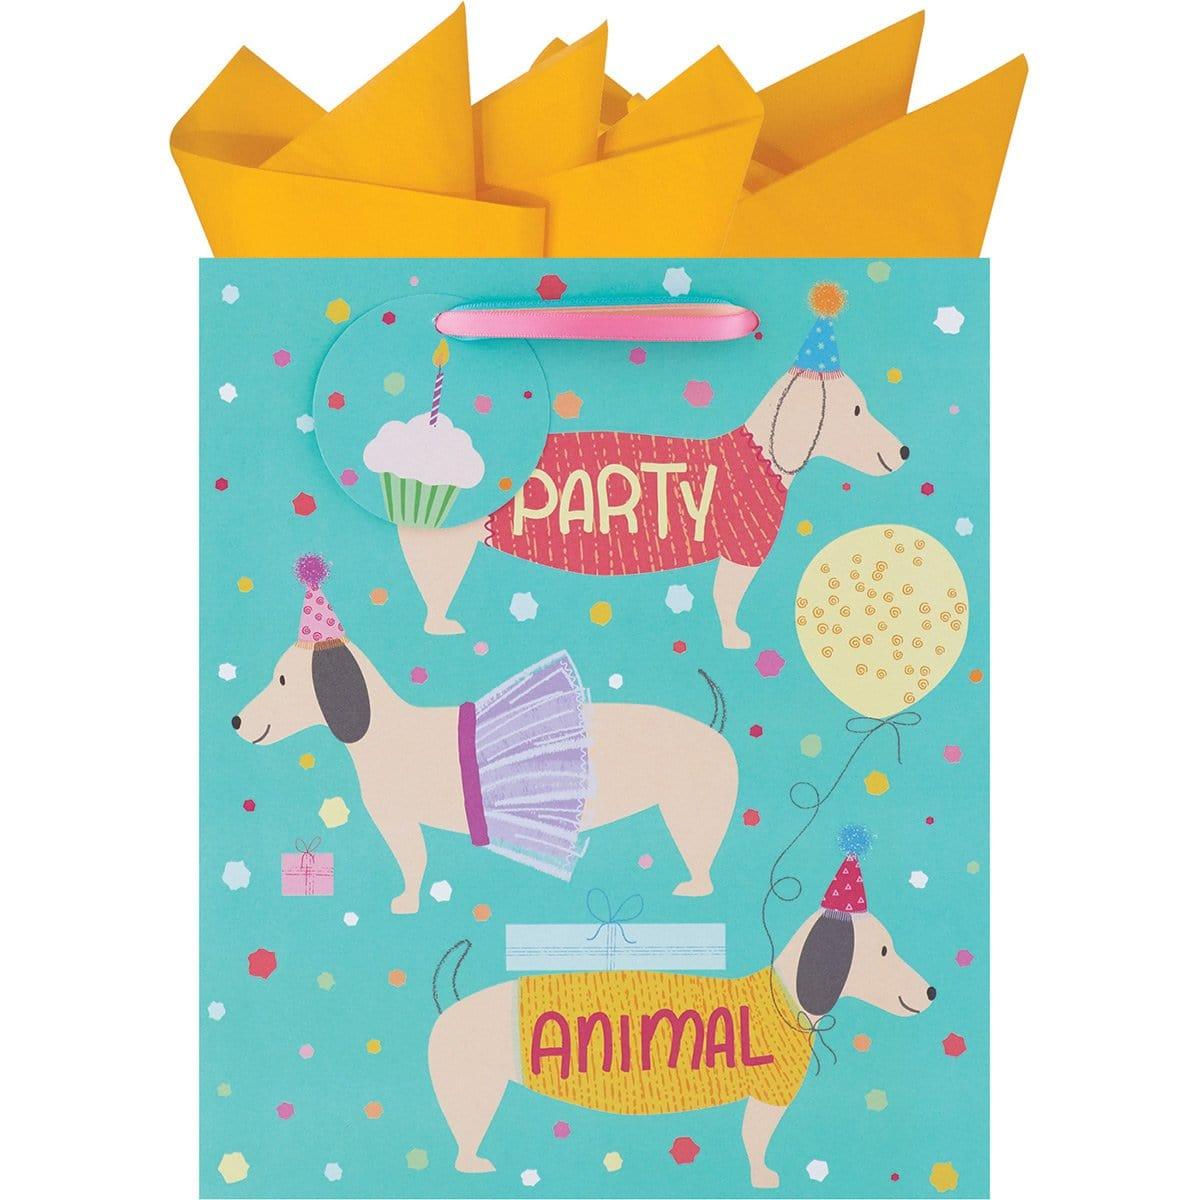 Buy Gift Wrap & Bags Gift Bag Medium 10 In. - Party Animals sold at Party Expert